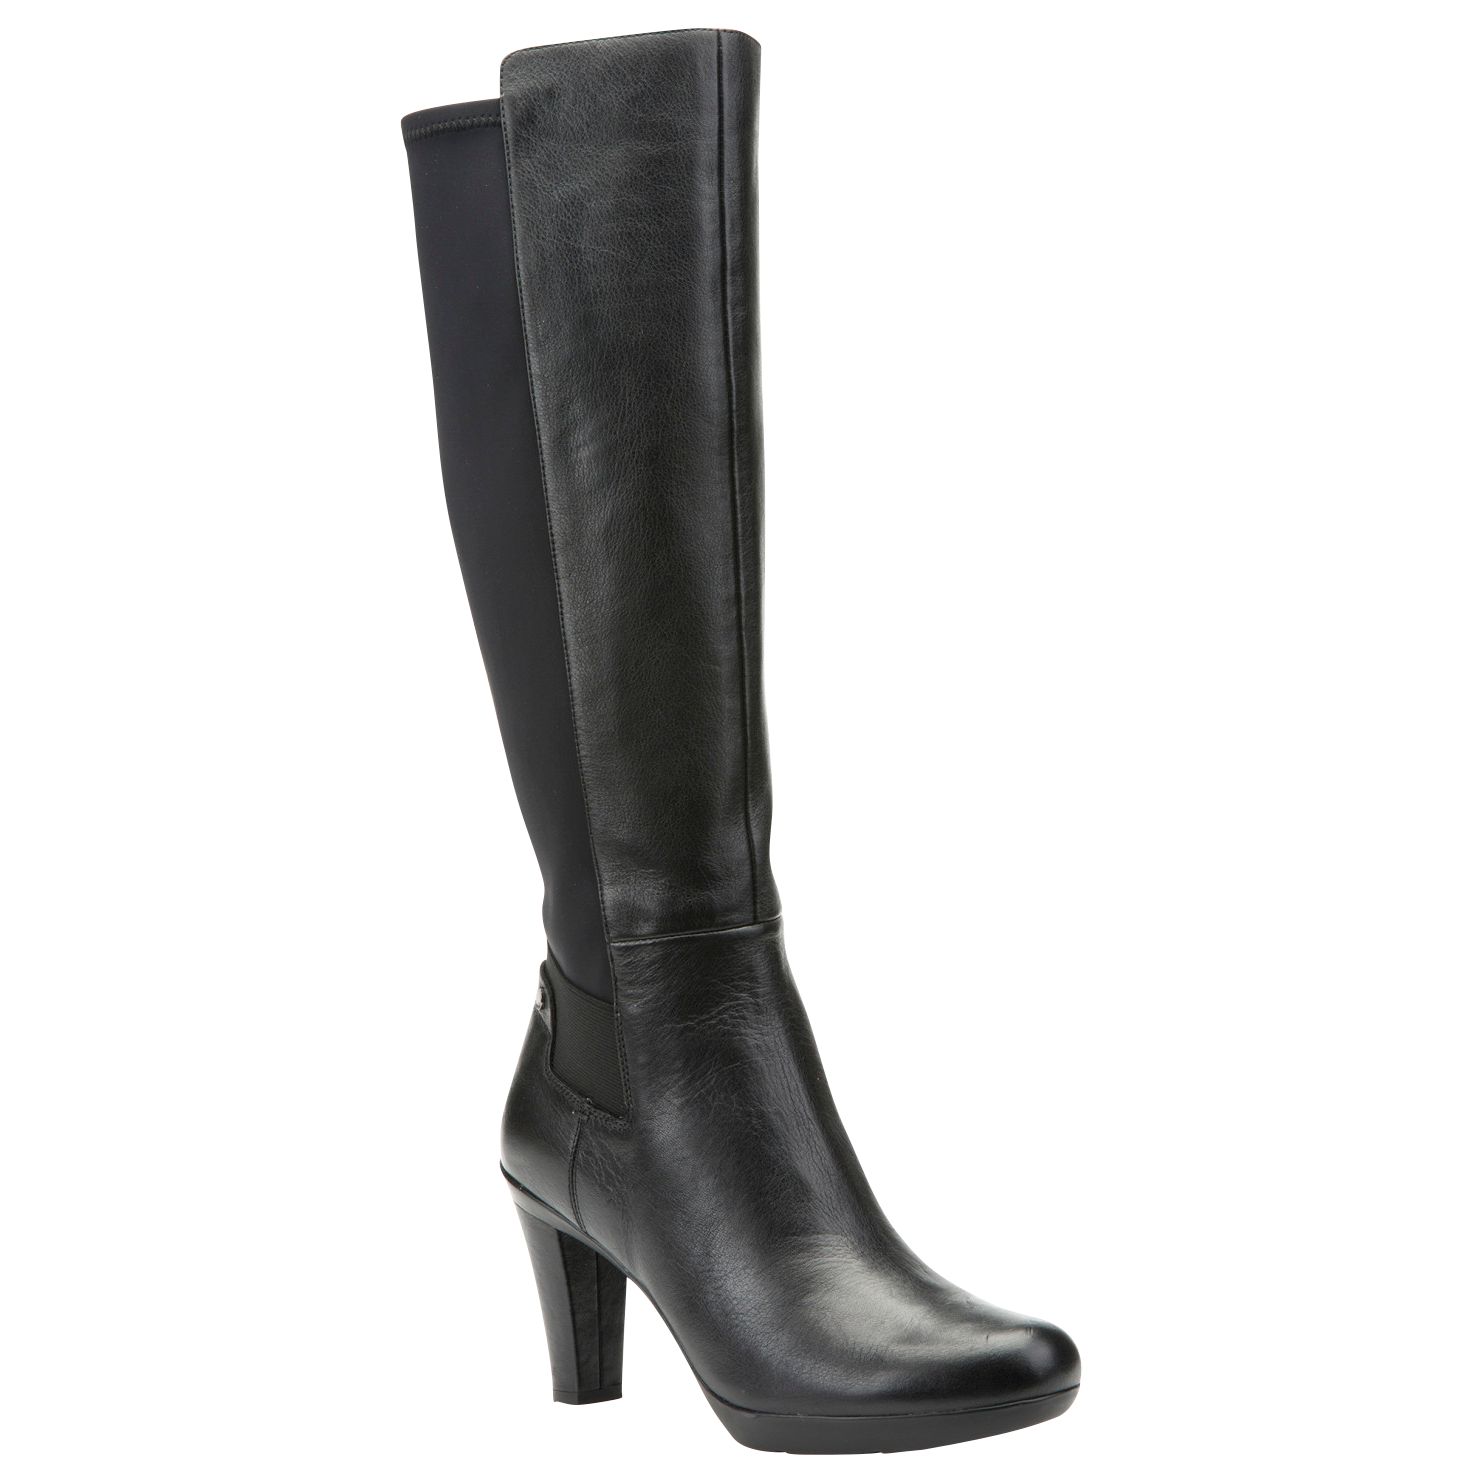 Geox Inspiration Cone Heeled Knee High Boots